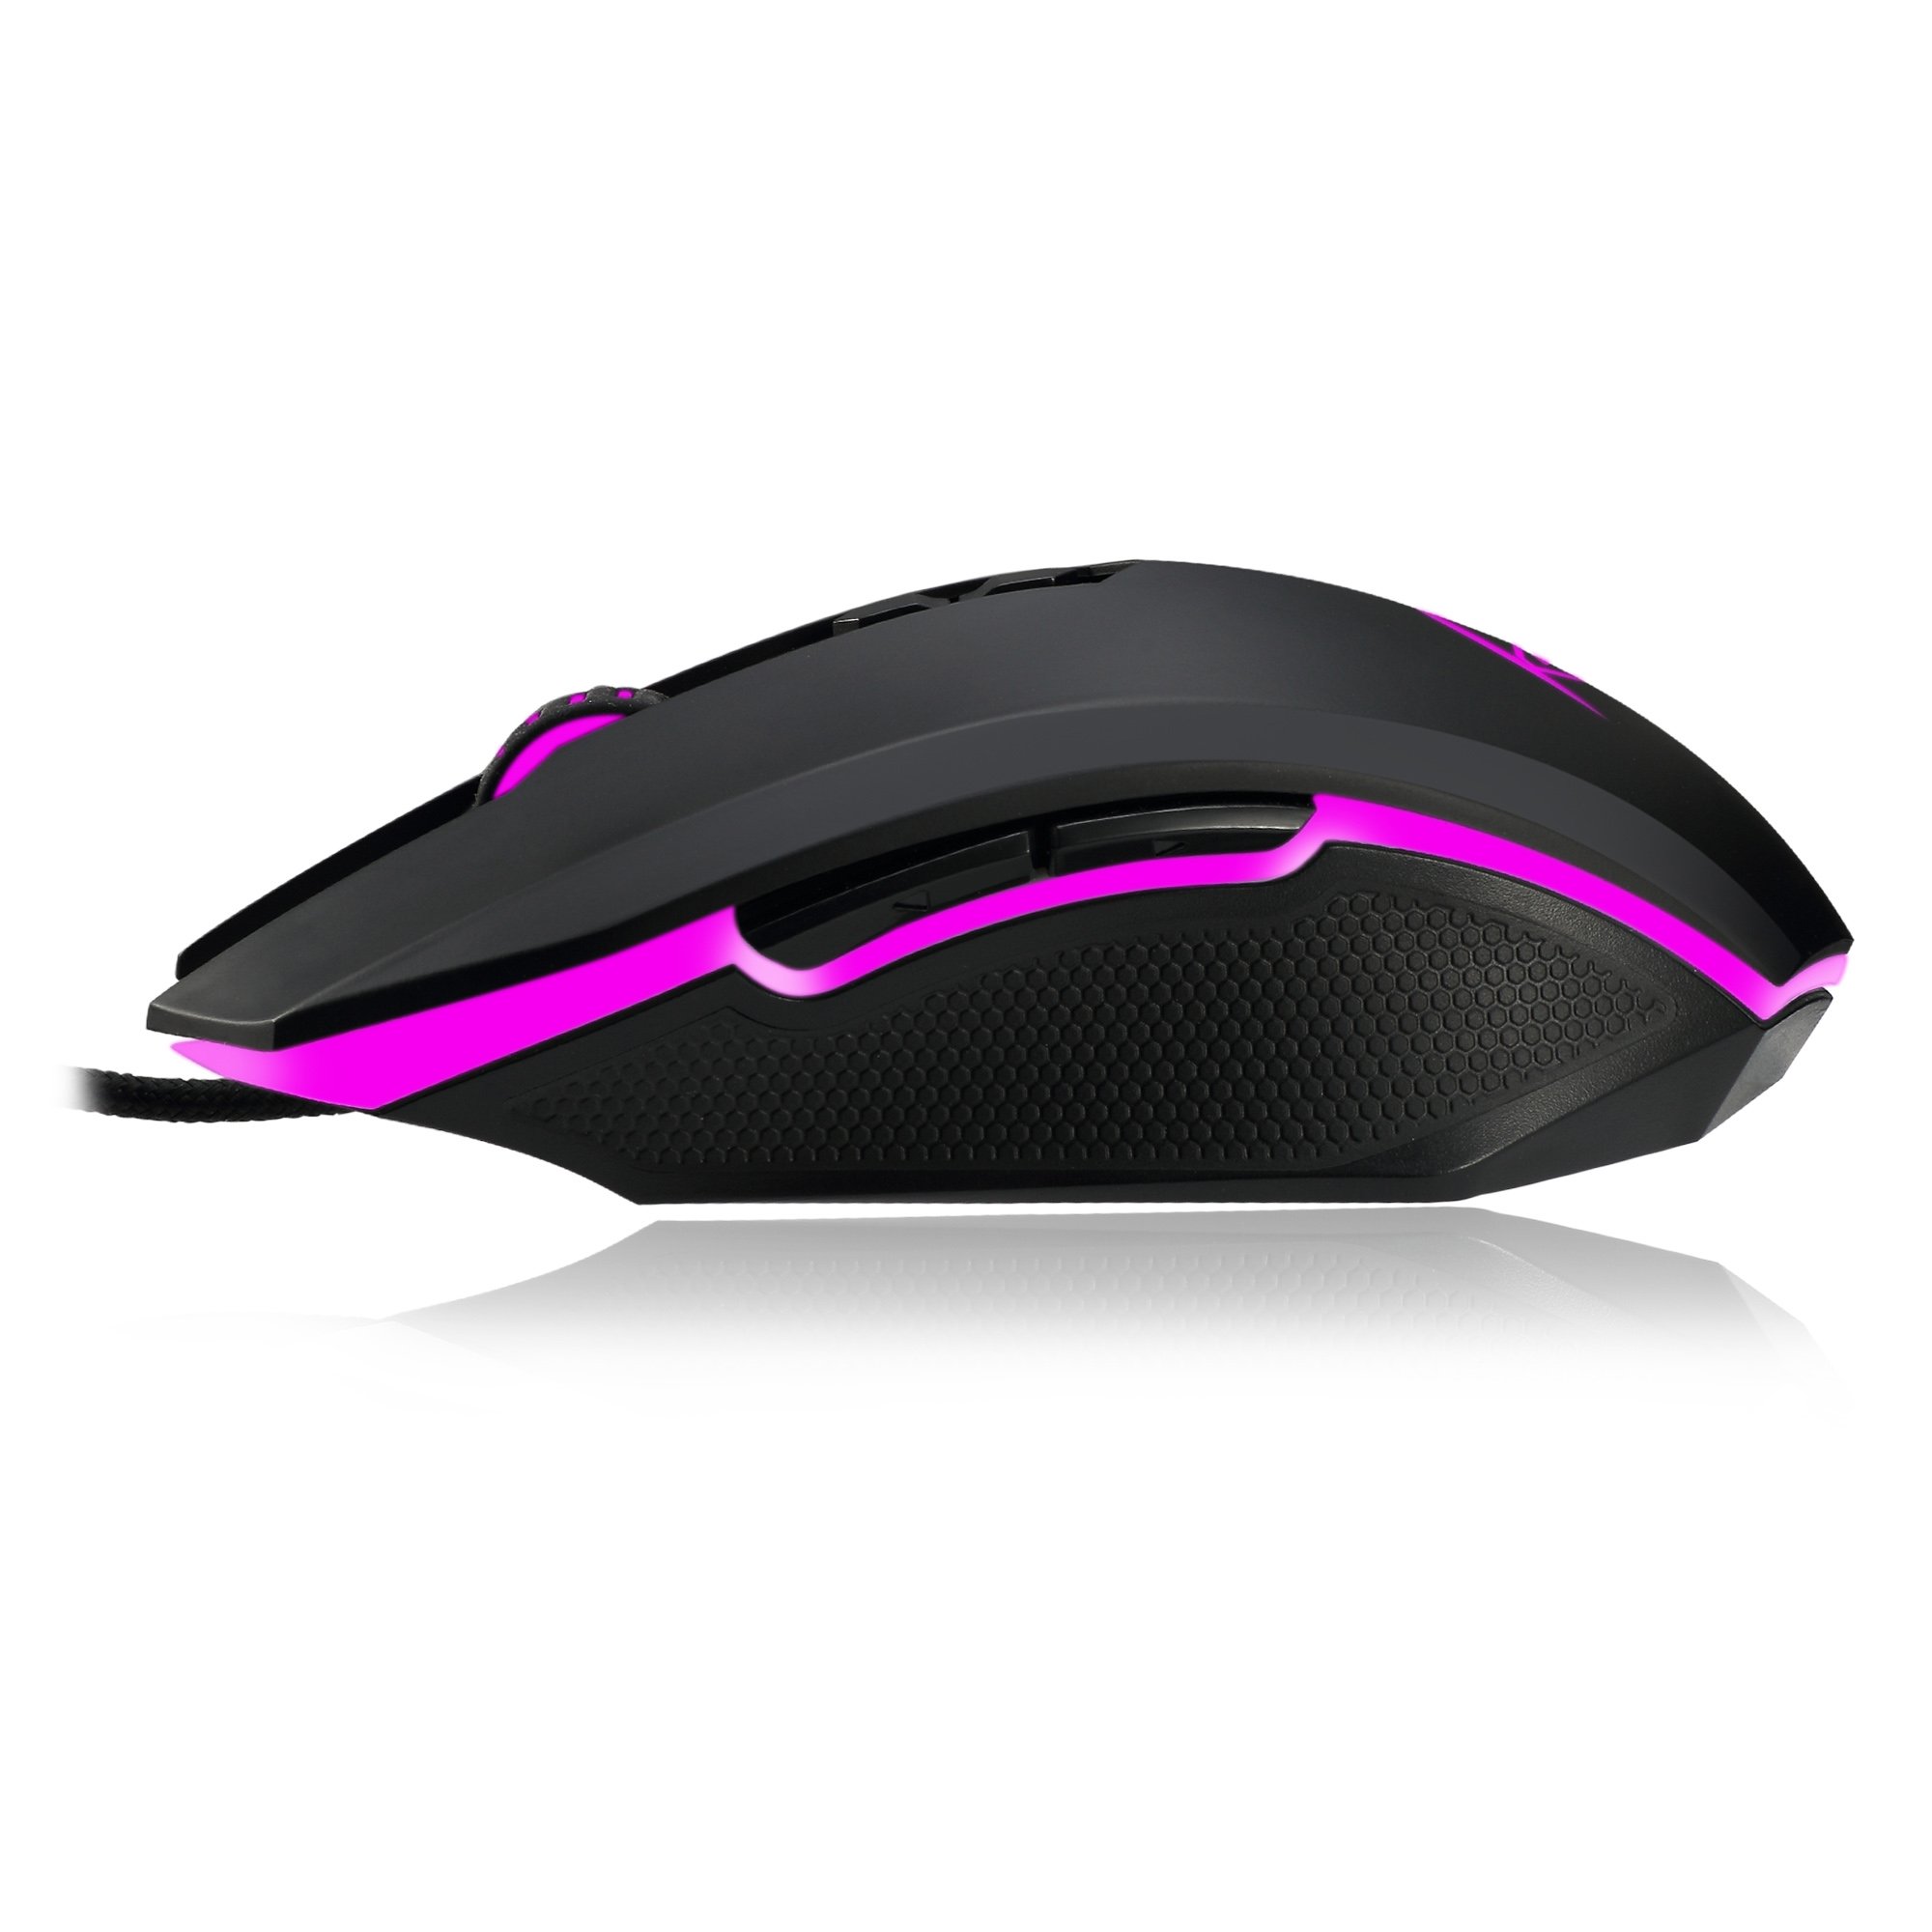 Adesso iMouse X2 Multi-Color 7-Button Programmable Gaming Mouse